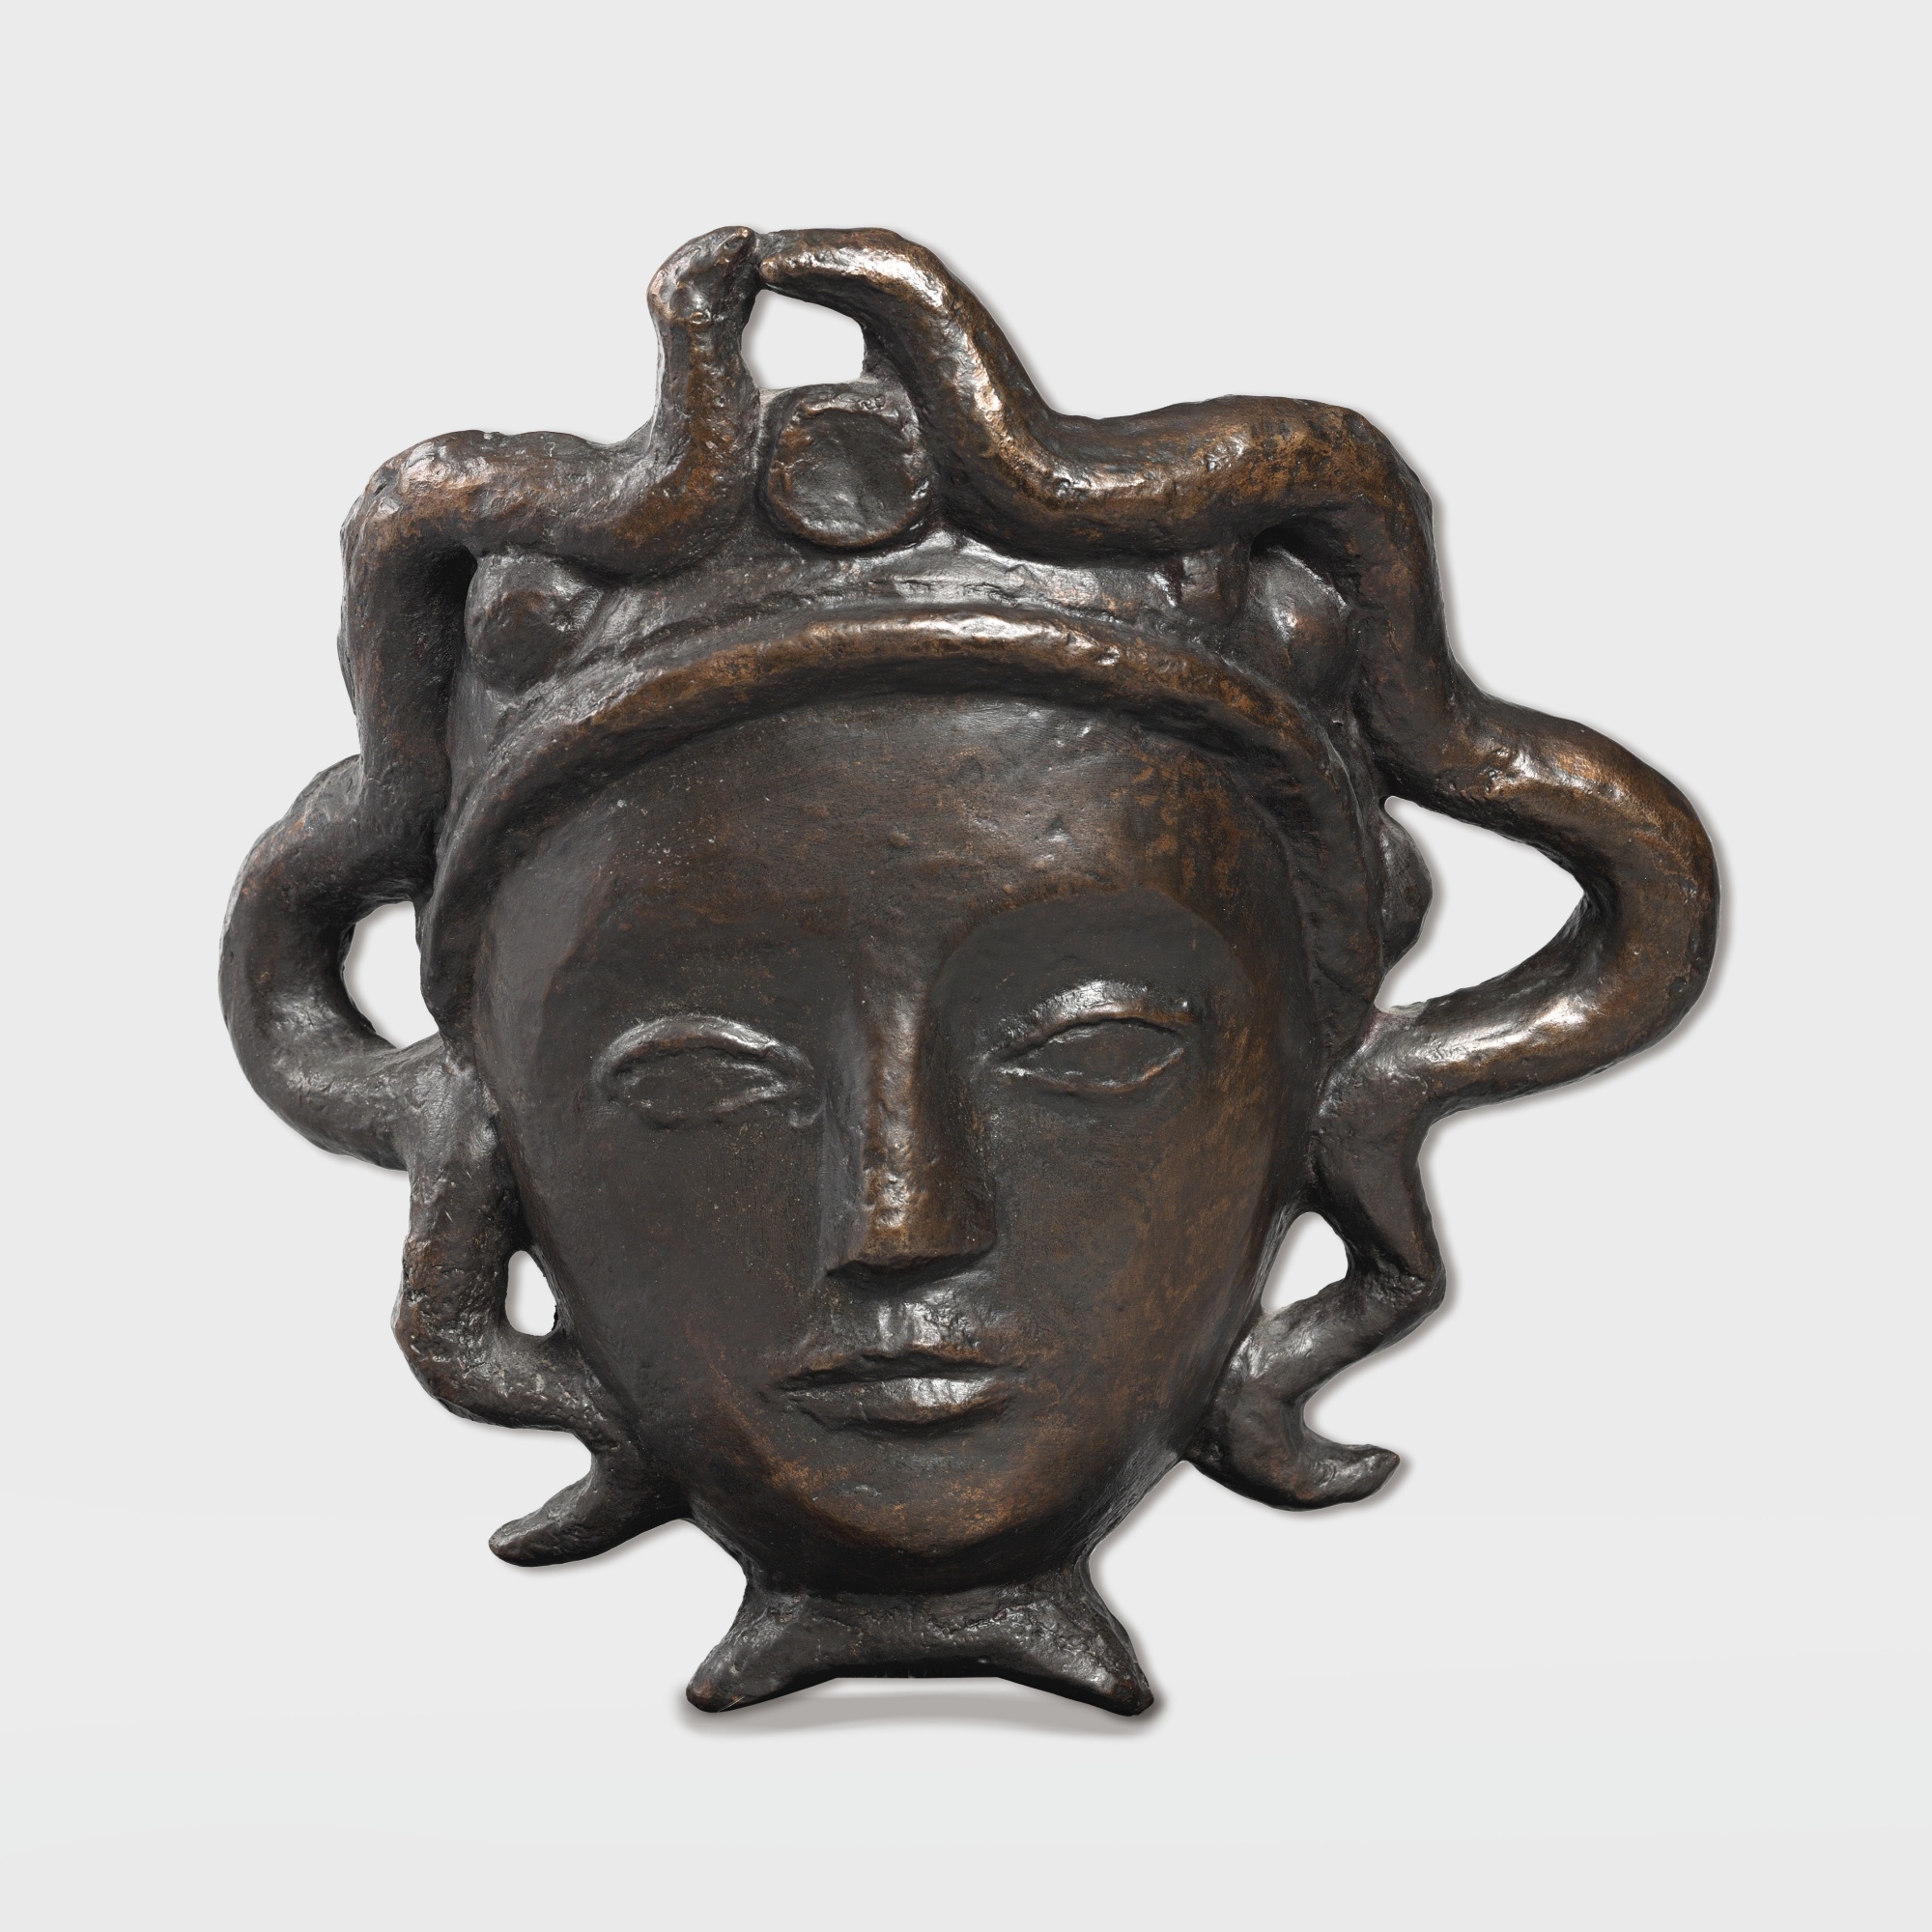 Applique, Modele Masque Aux Serpents by Alberto Giacometti, Conceived in 1935; cast at a later date